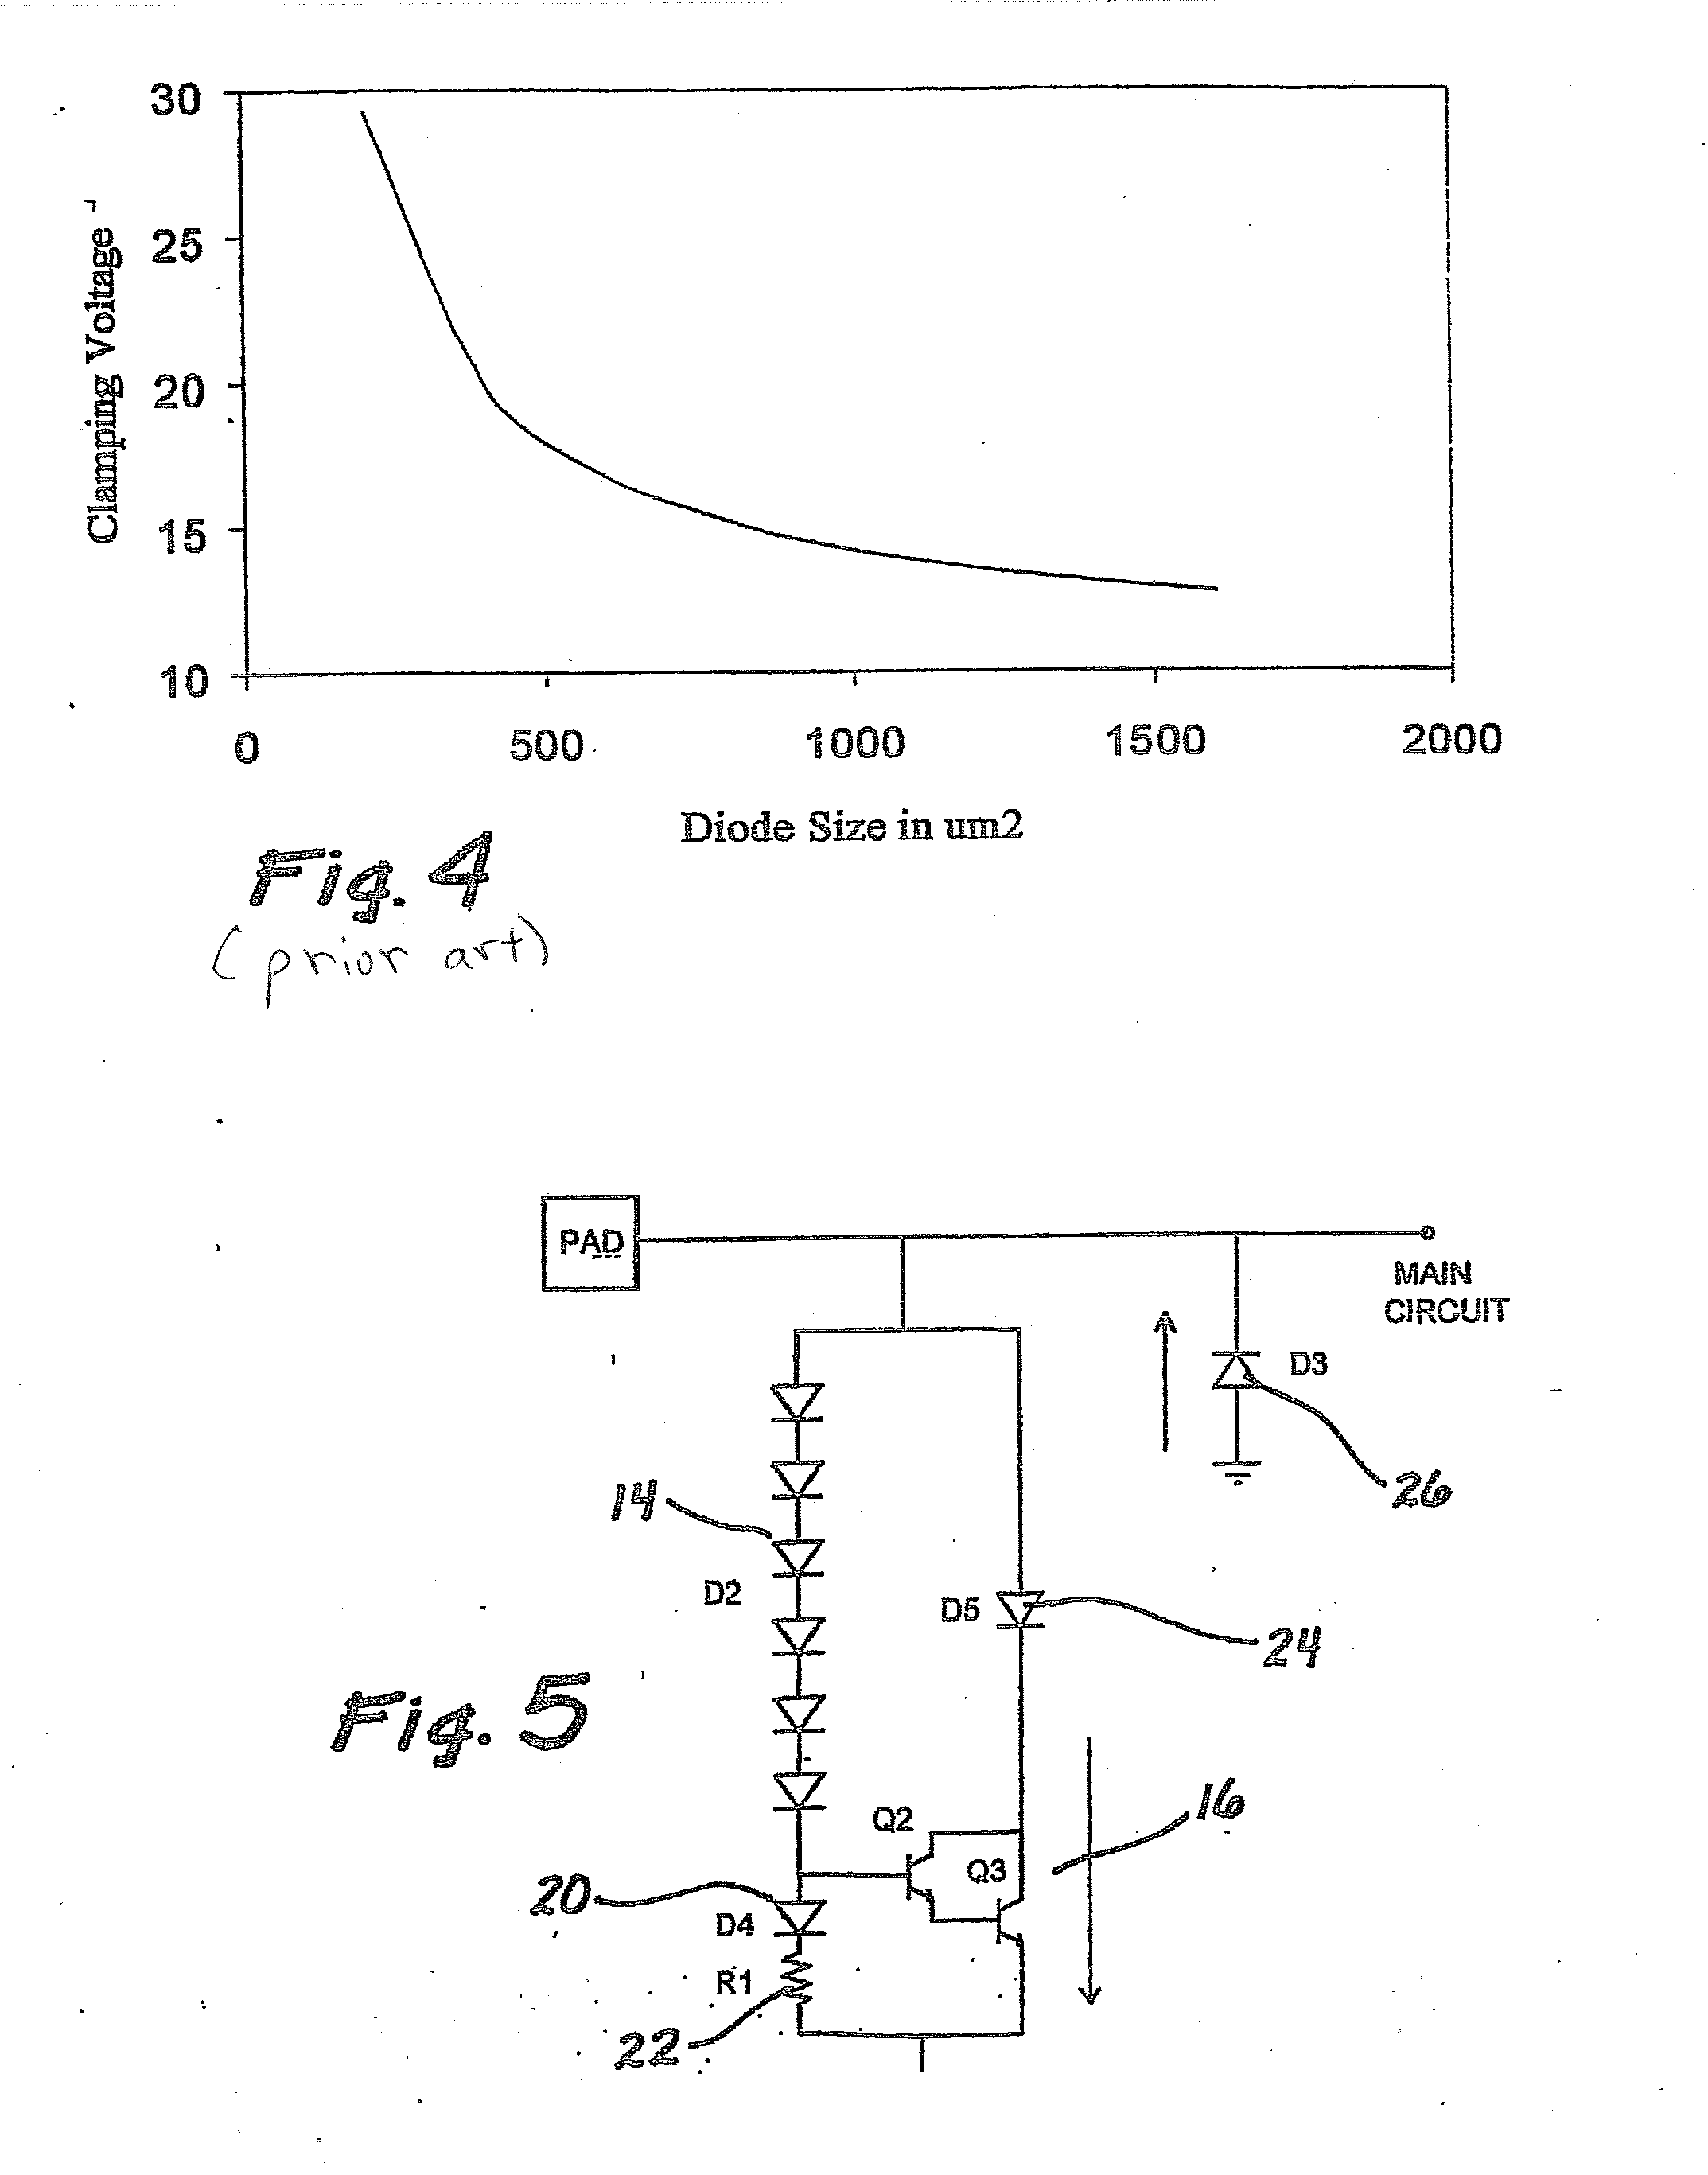 On-chip ESD protection circuit for compound semiconductor heterojunction bipolar transitor RF circuits